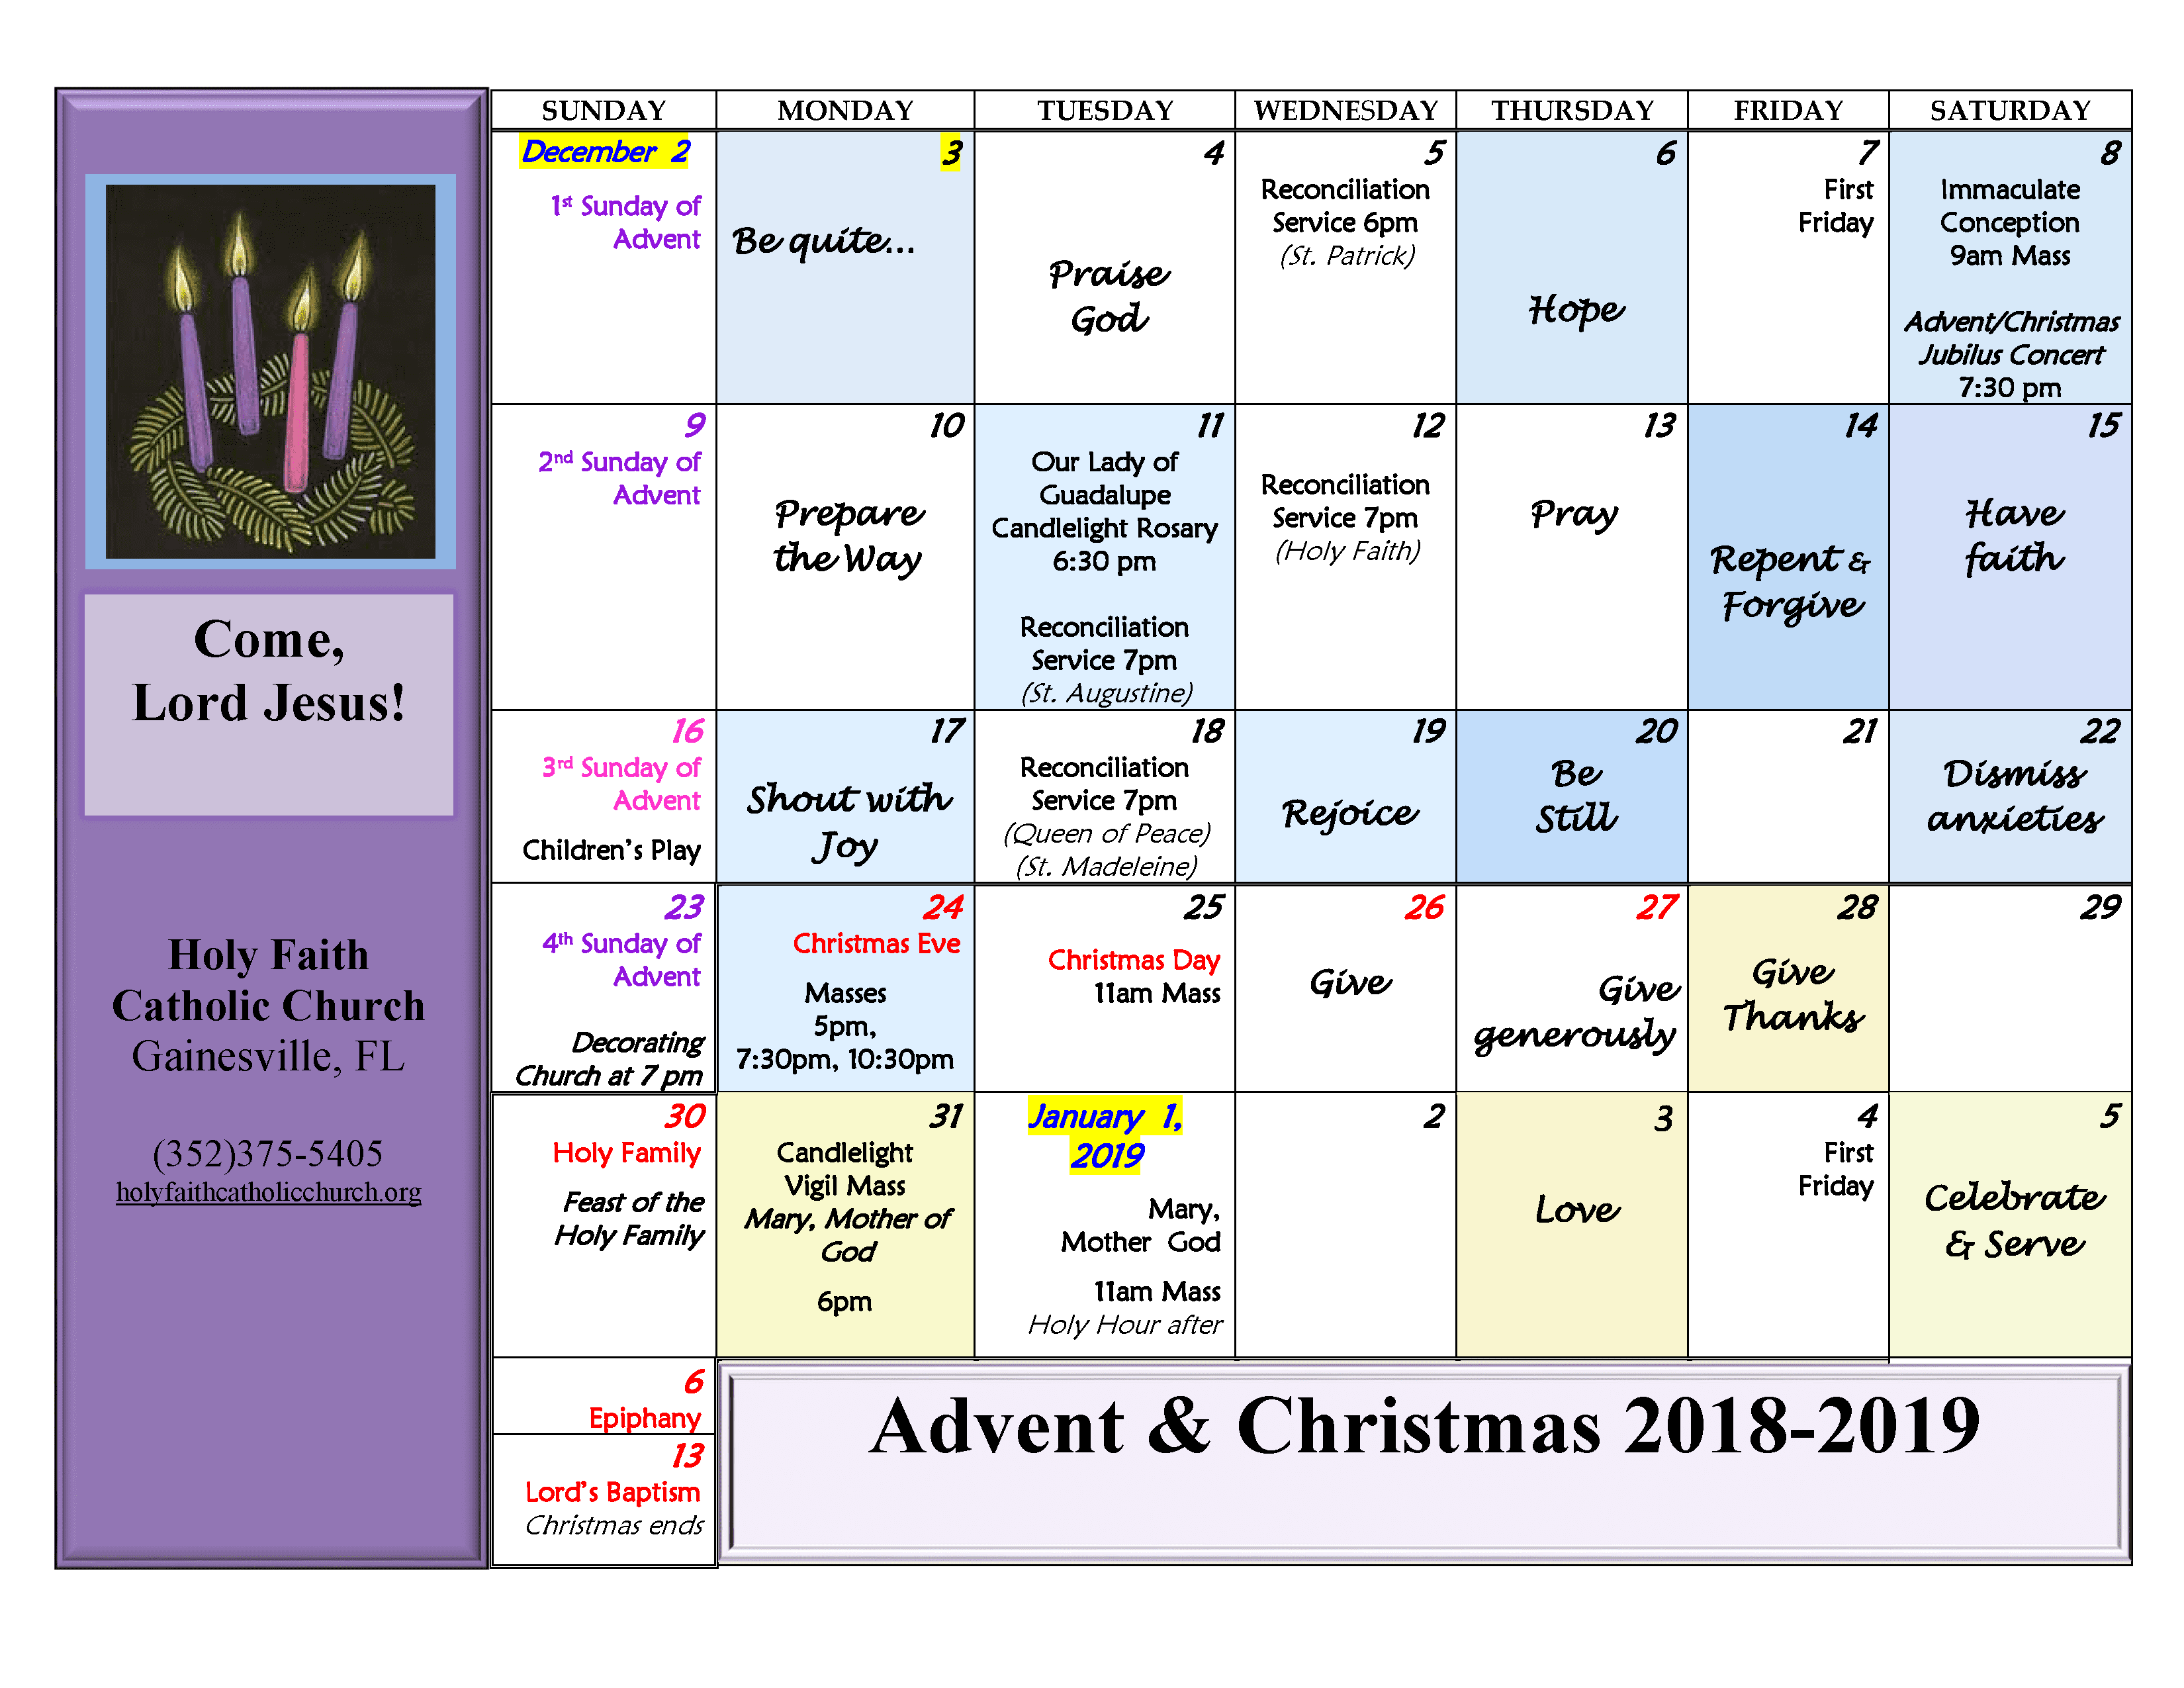 Advent Schedule and Events Holy Faith Catholic Church